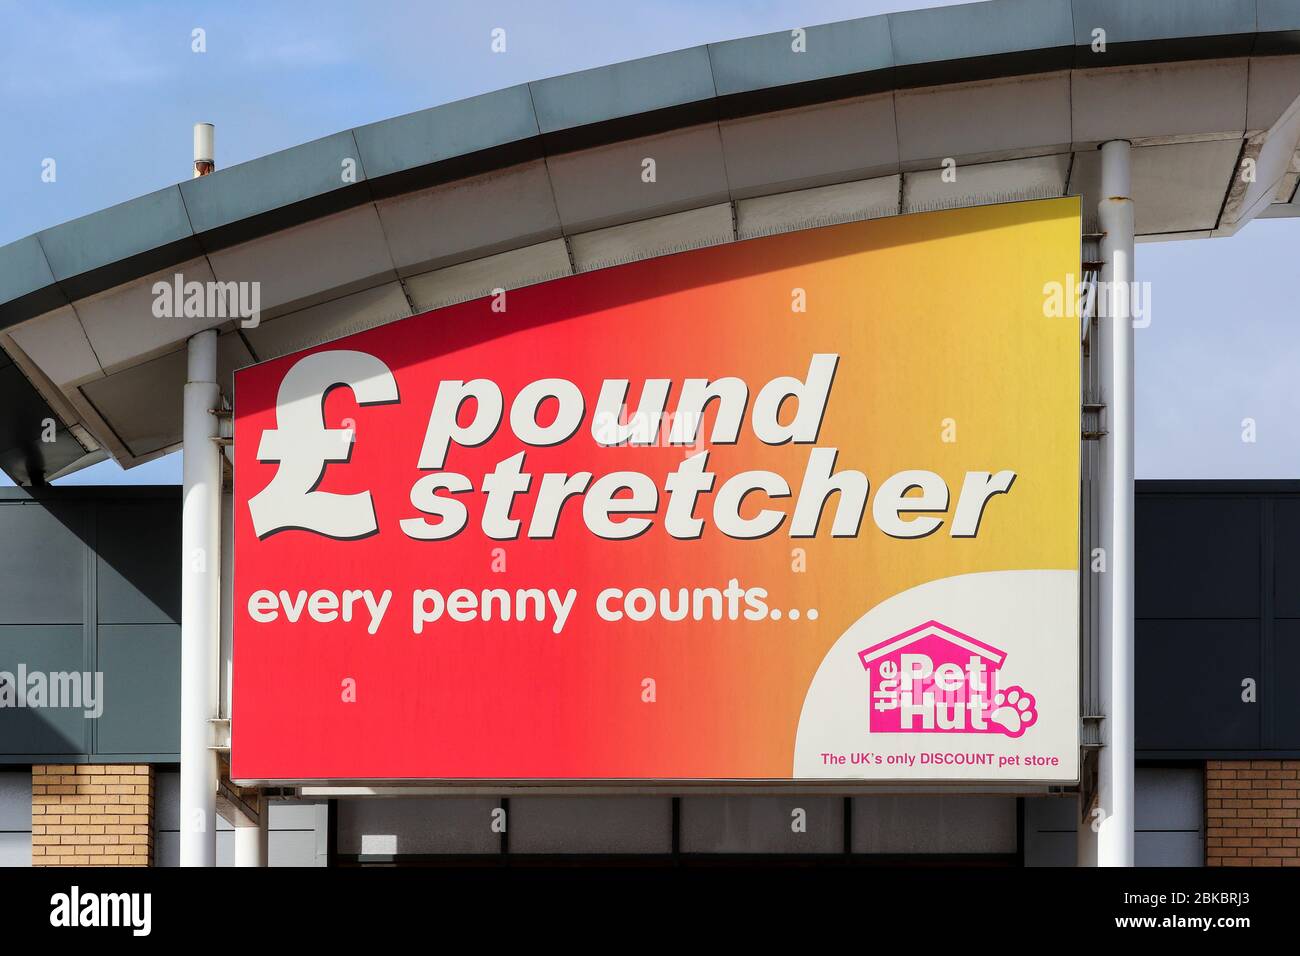 Poundstretcher and The Pet Hut company logo above and entrance to a shop mall, Irvine, UK Stock Photo